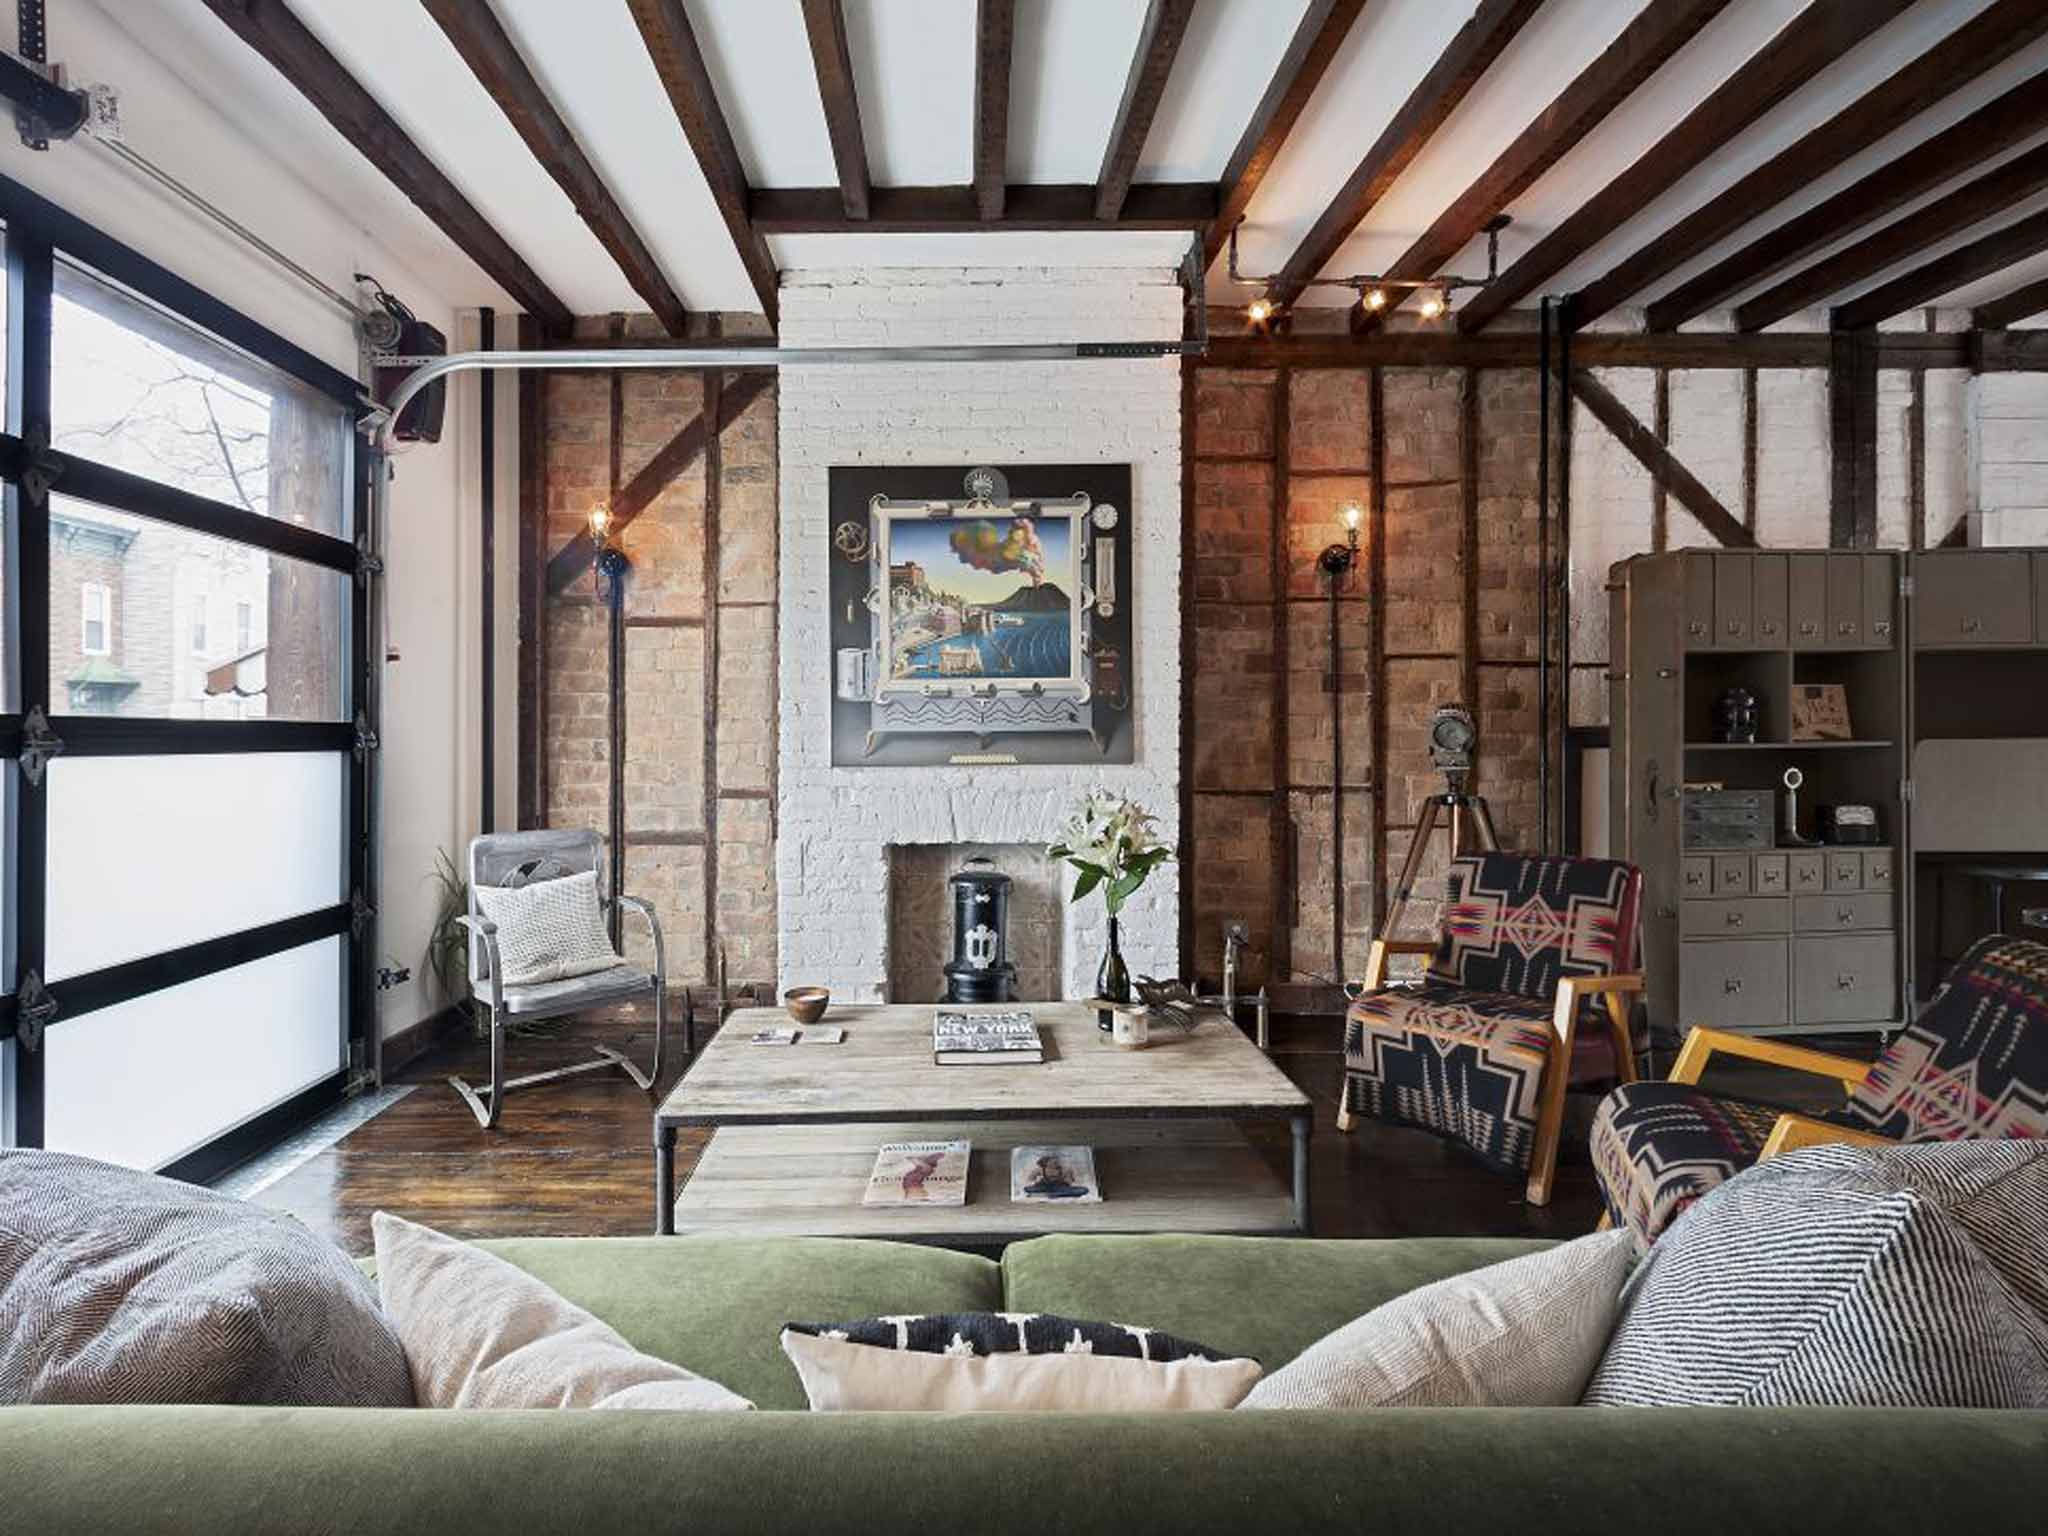 Giddy Up: Urban Cowboy's chic living space